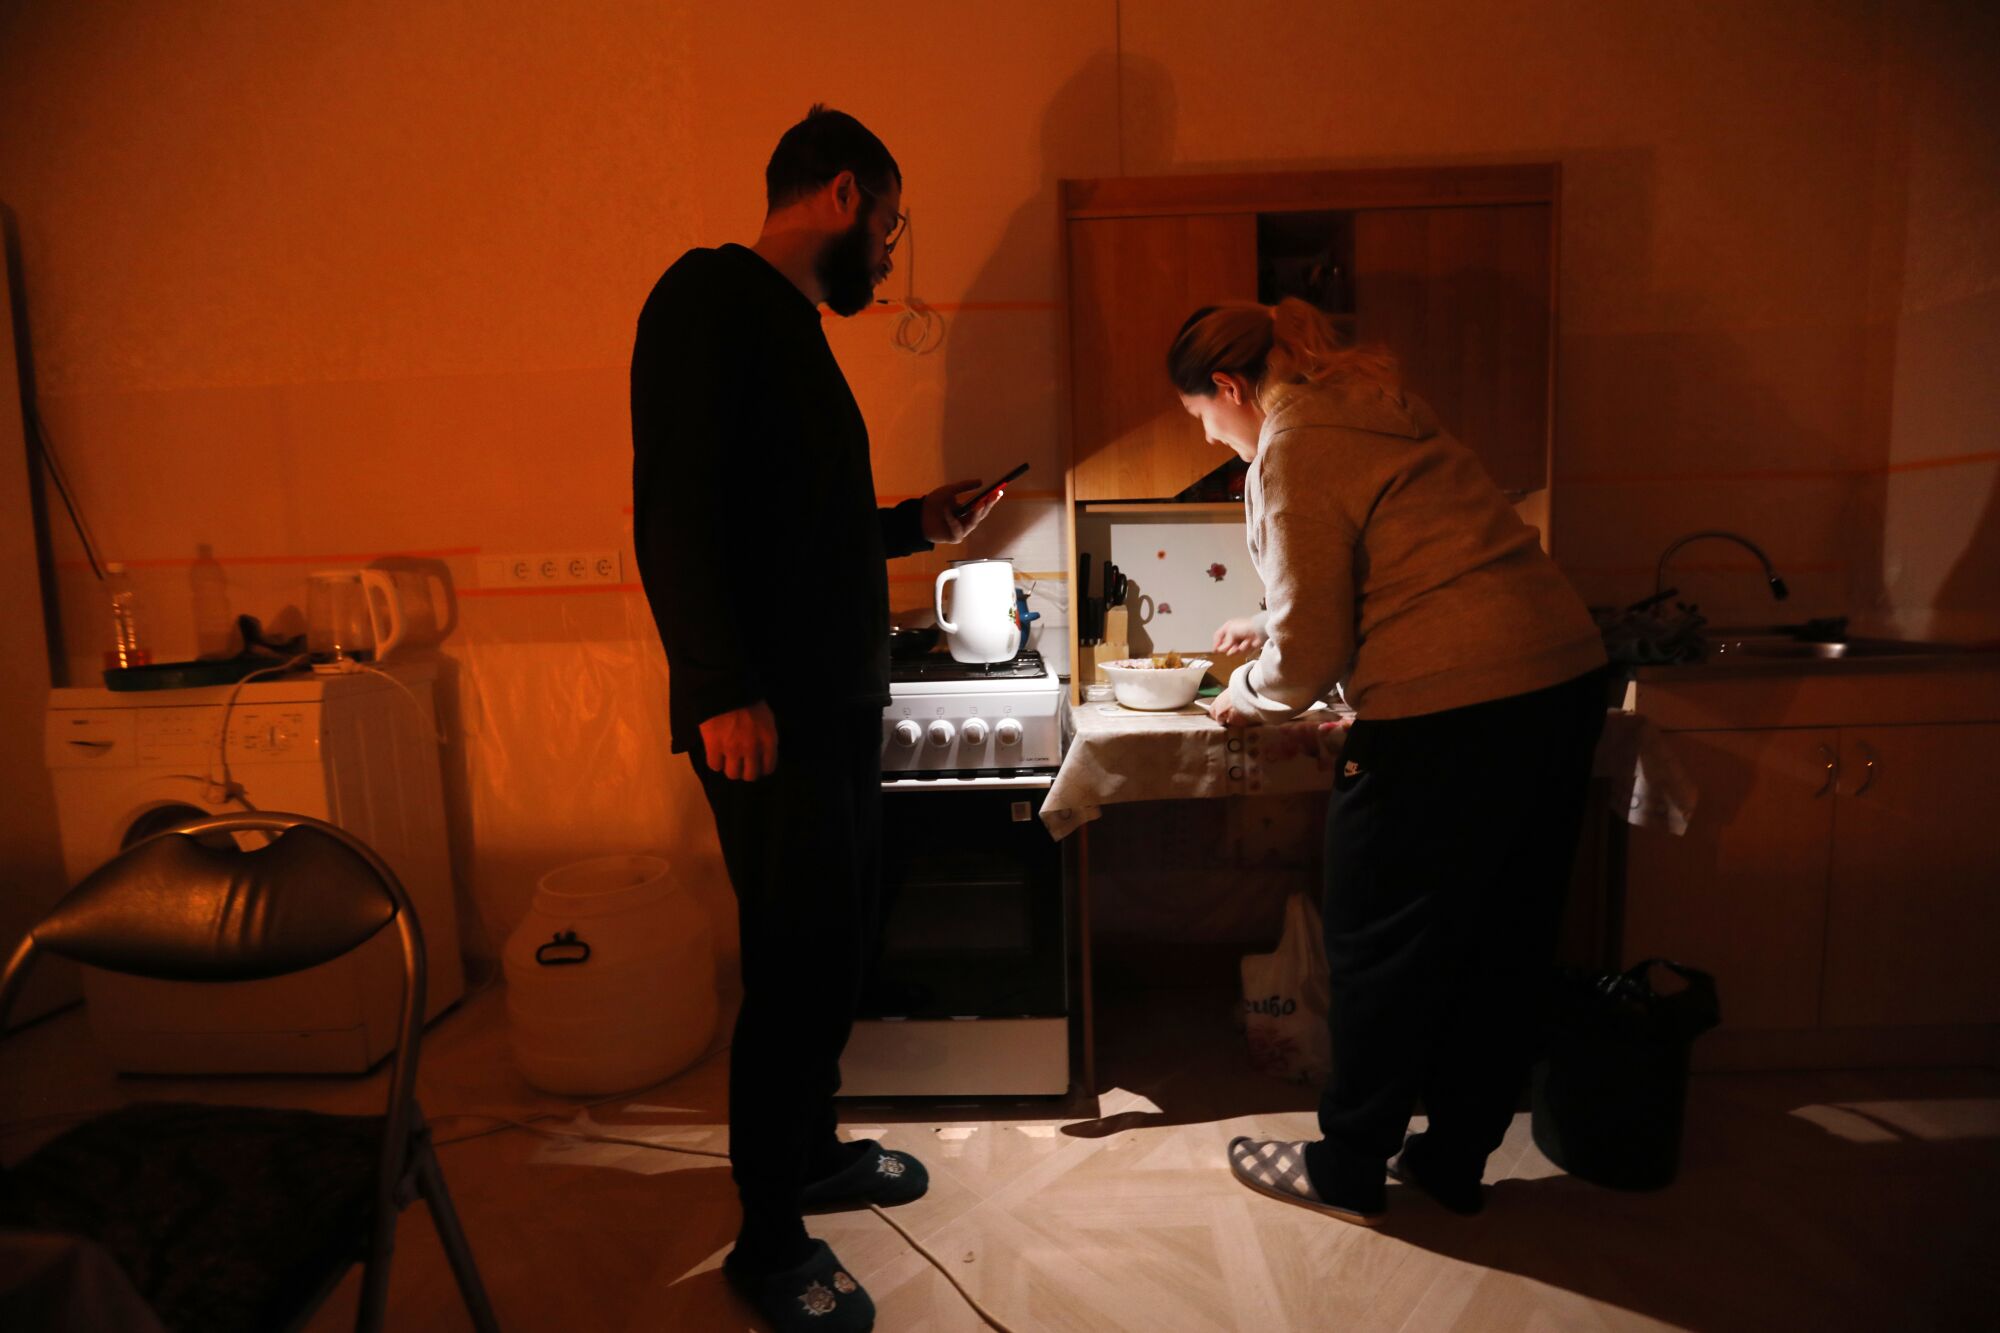 A man in dark clothing, left, uses his cellphone to shine light on a woman preparing food at a table 